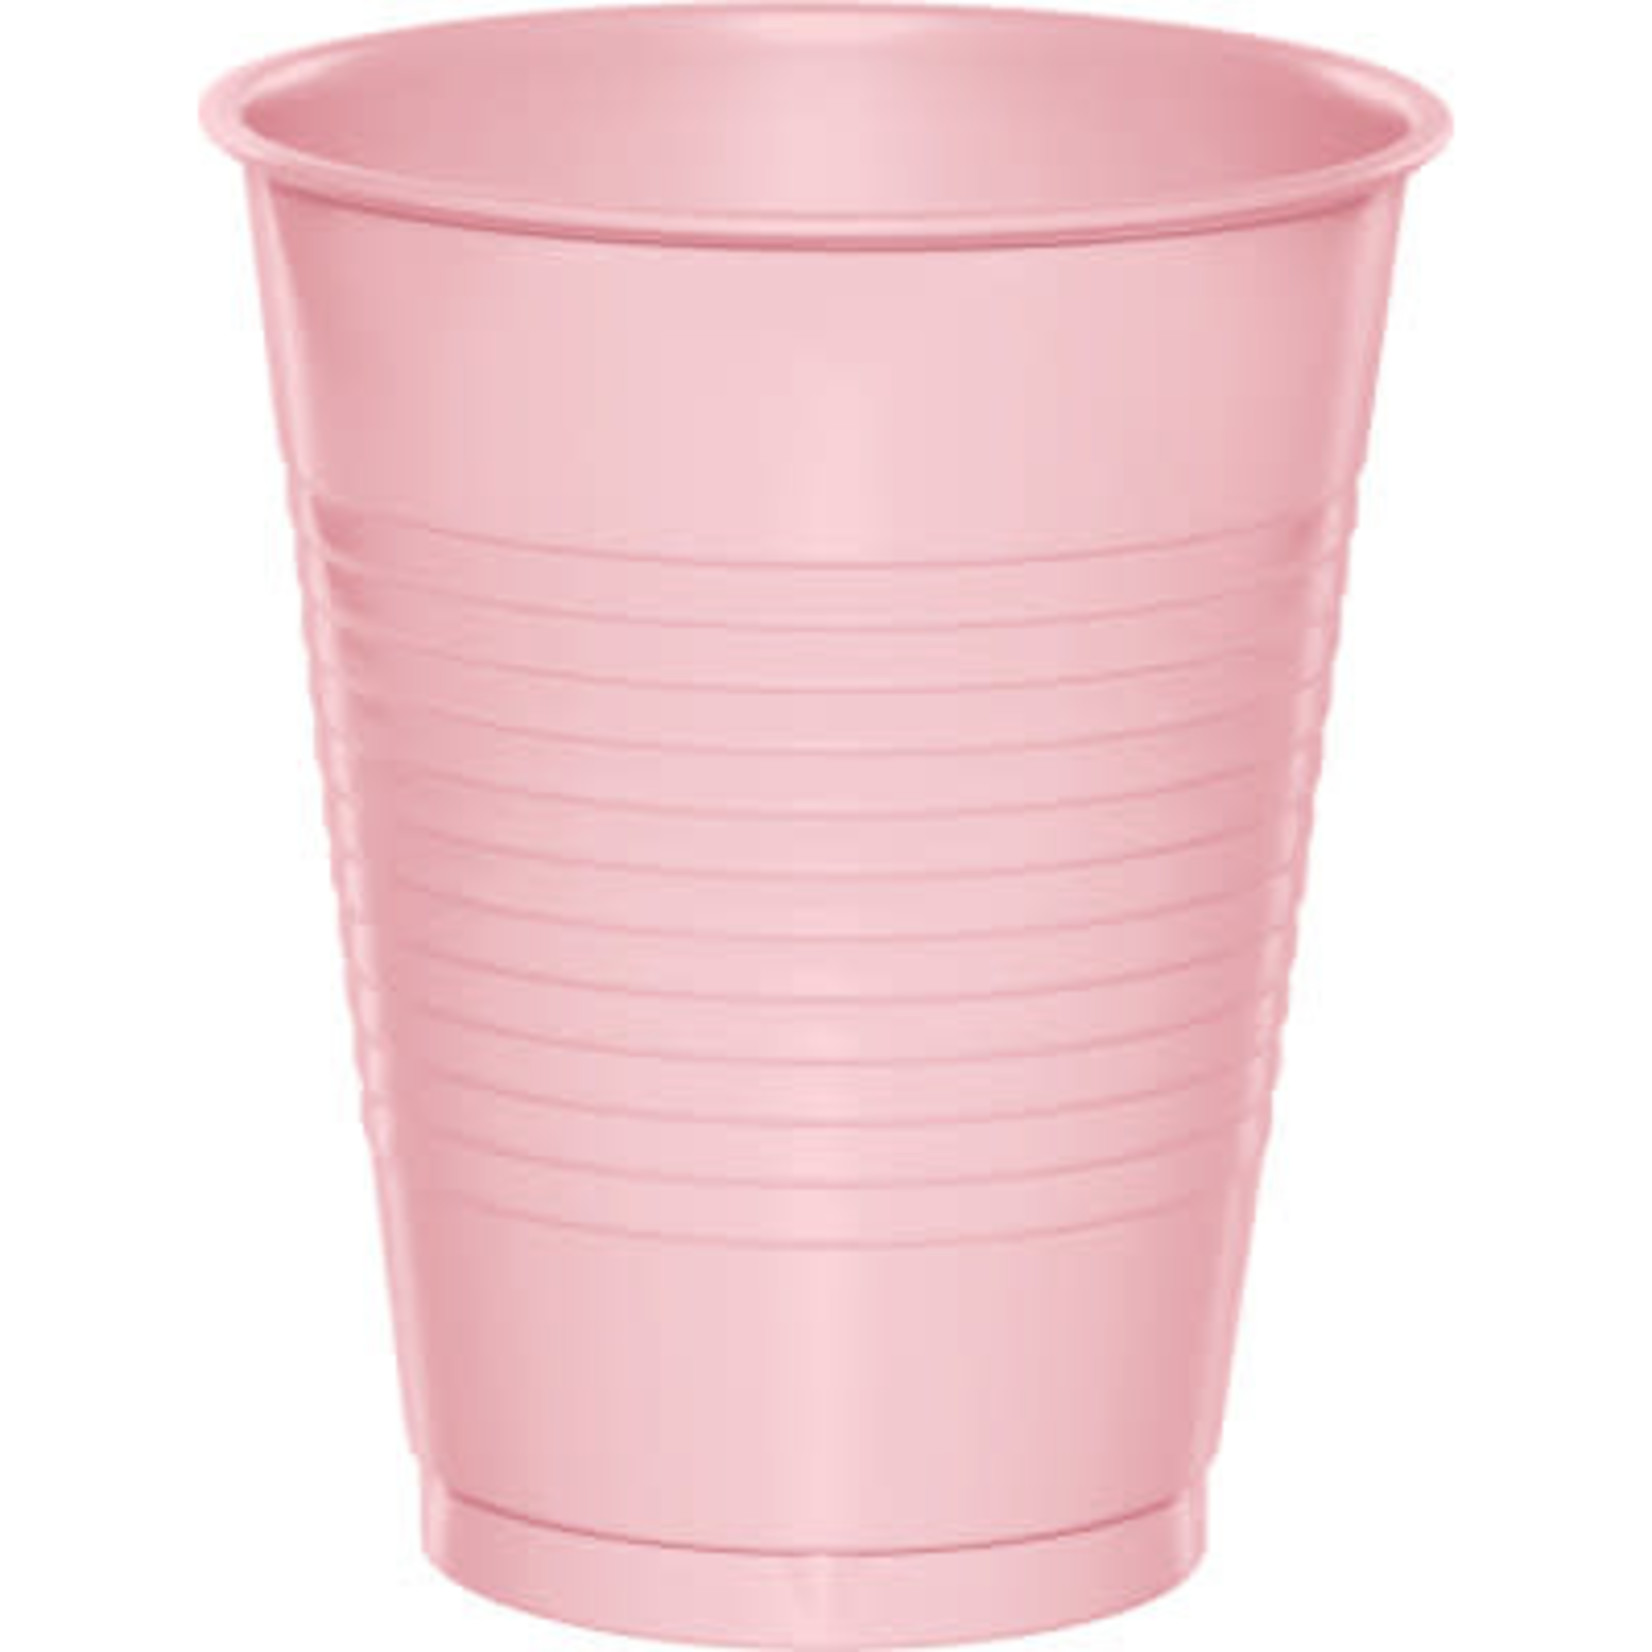 Touch of Color 16oz. Classic Pink Plastic Cups - 20ct.